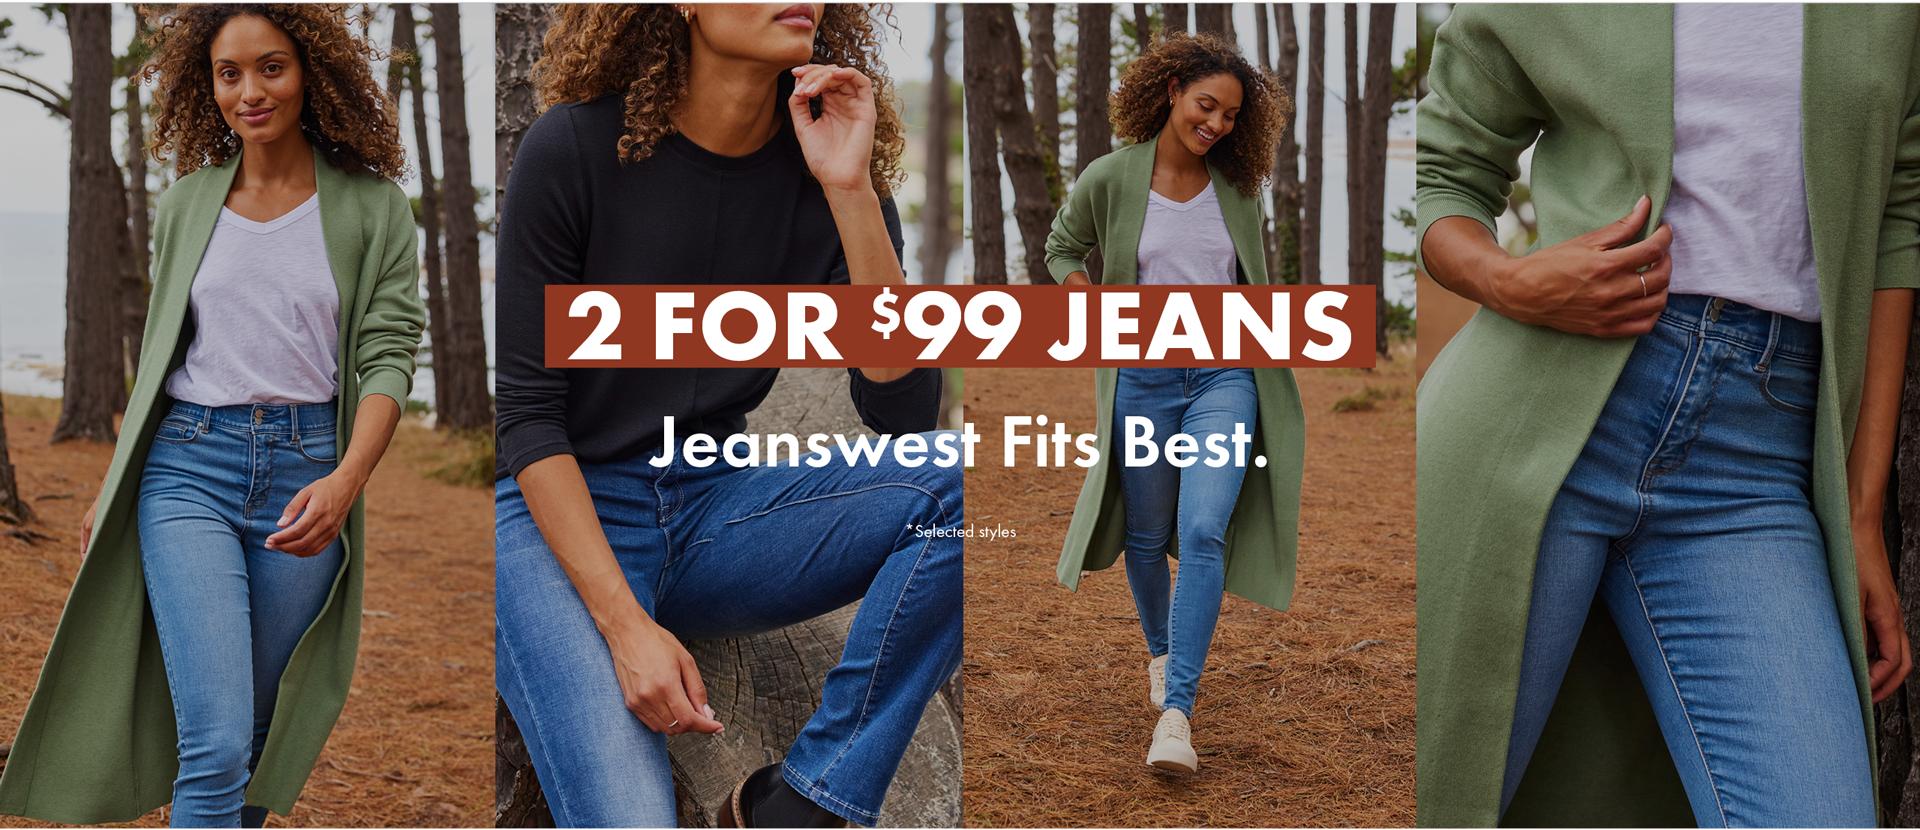 2 for $99 Jeans*